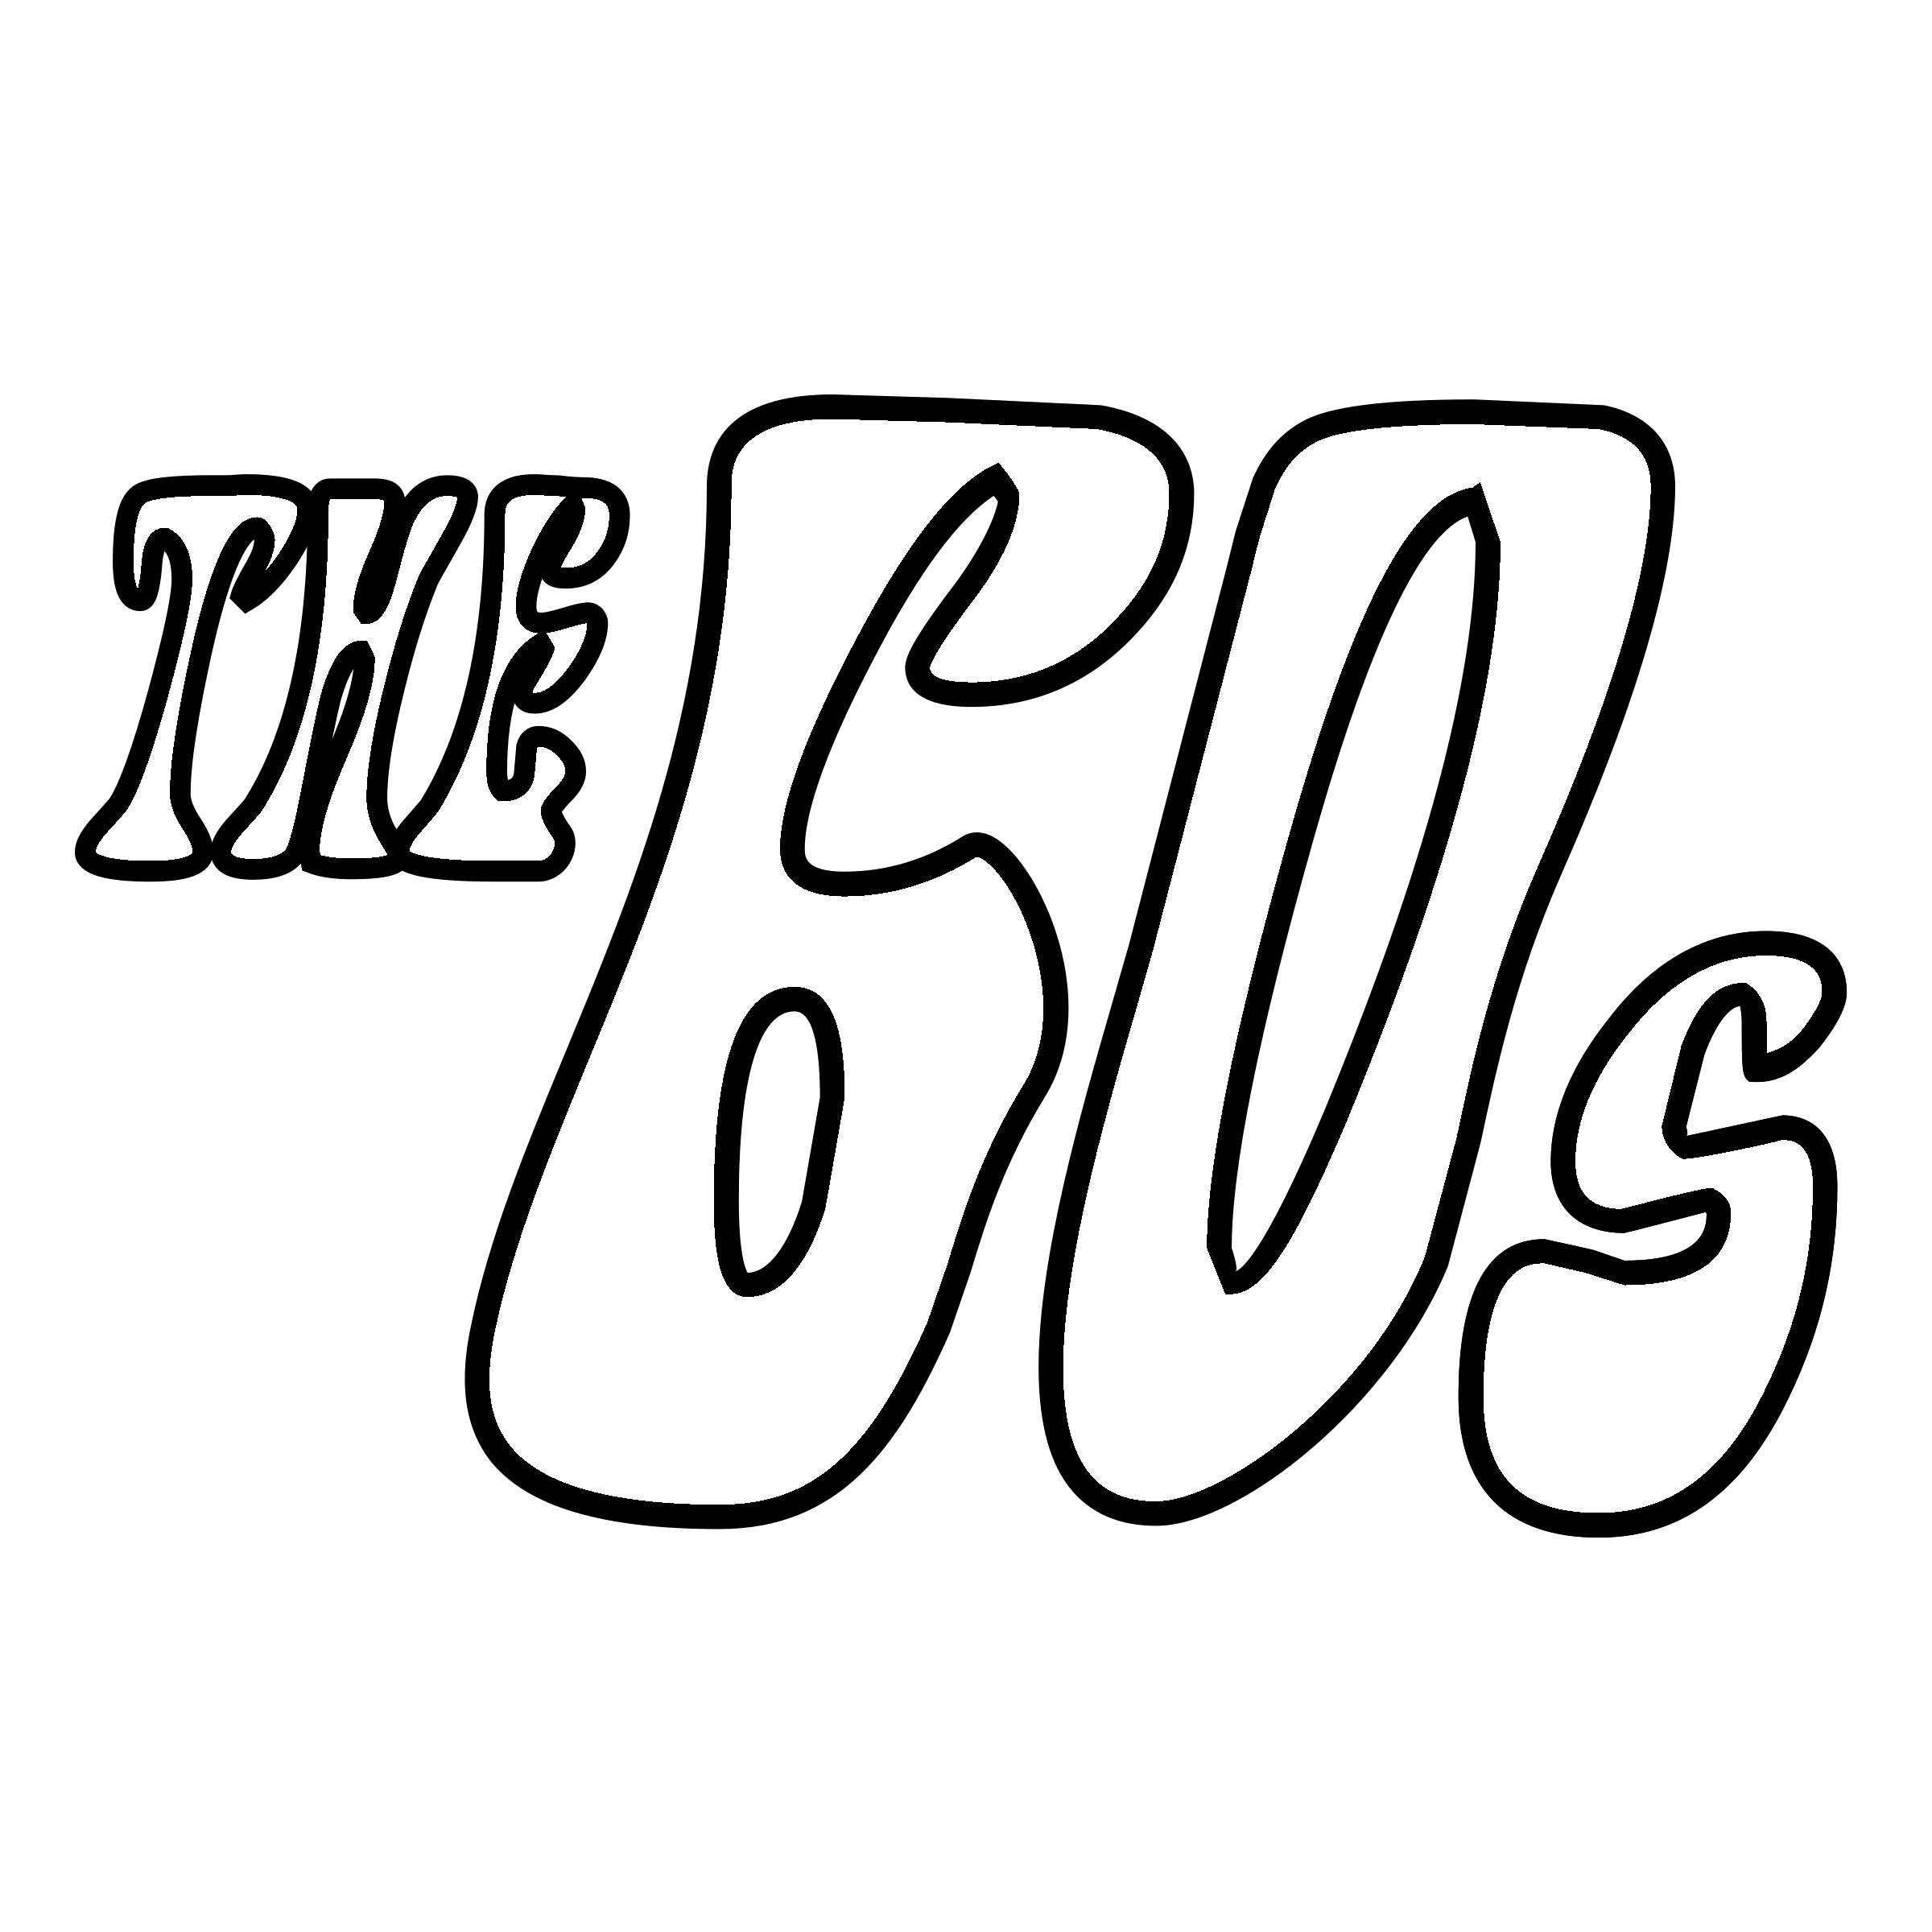 60s Logo - The 60's Logo PNG Transparent & SVG Vector - Freebie Supply